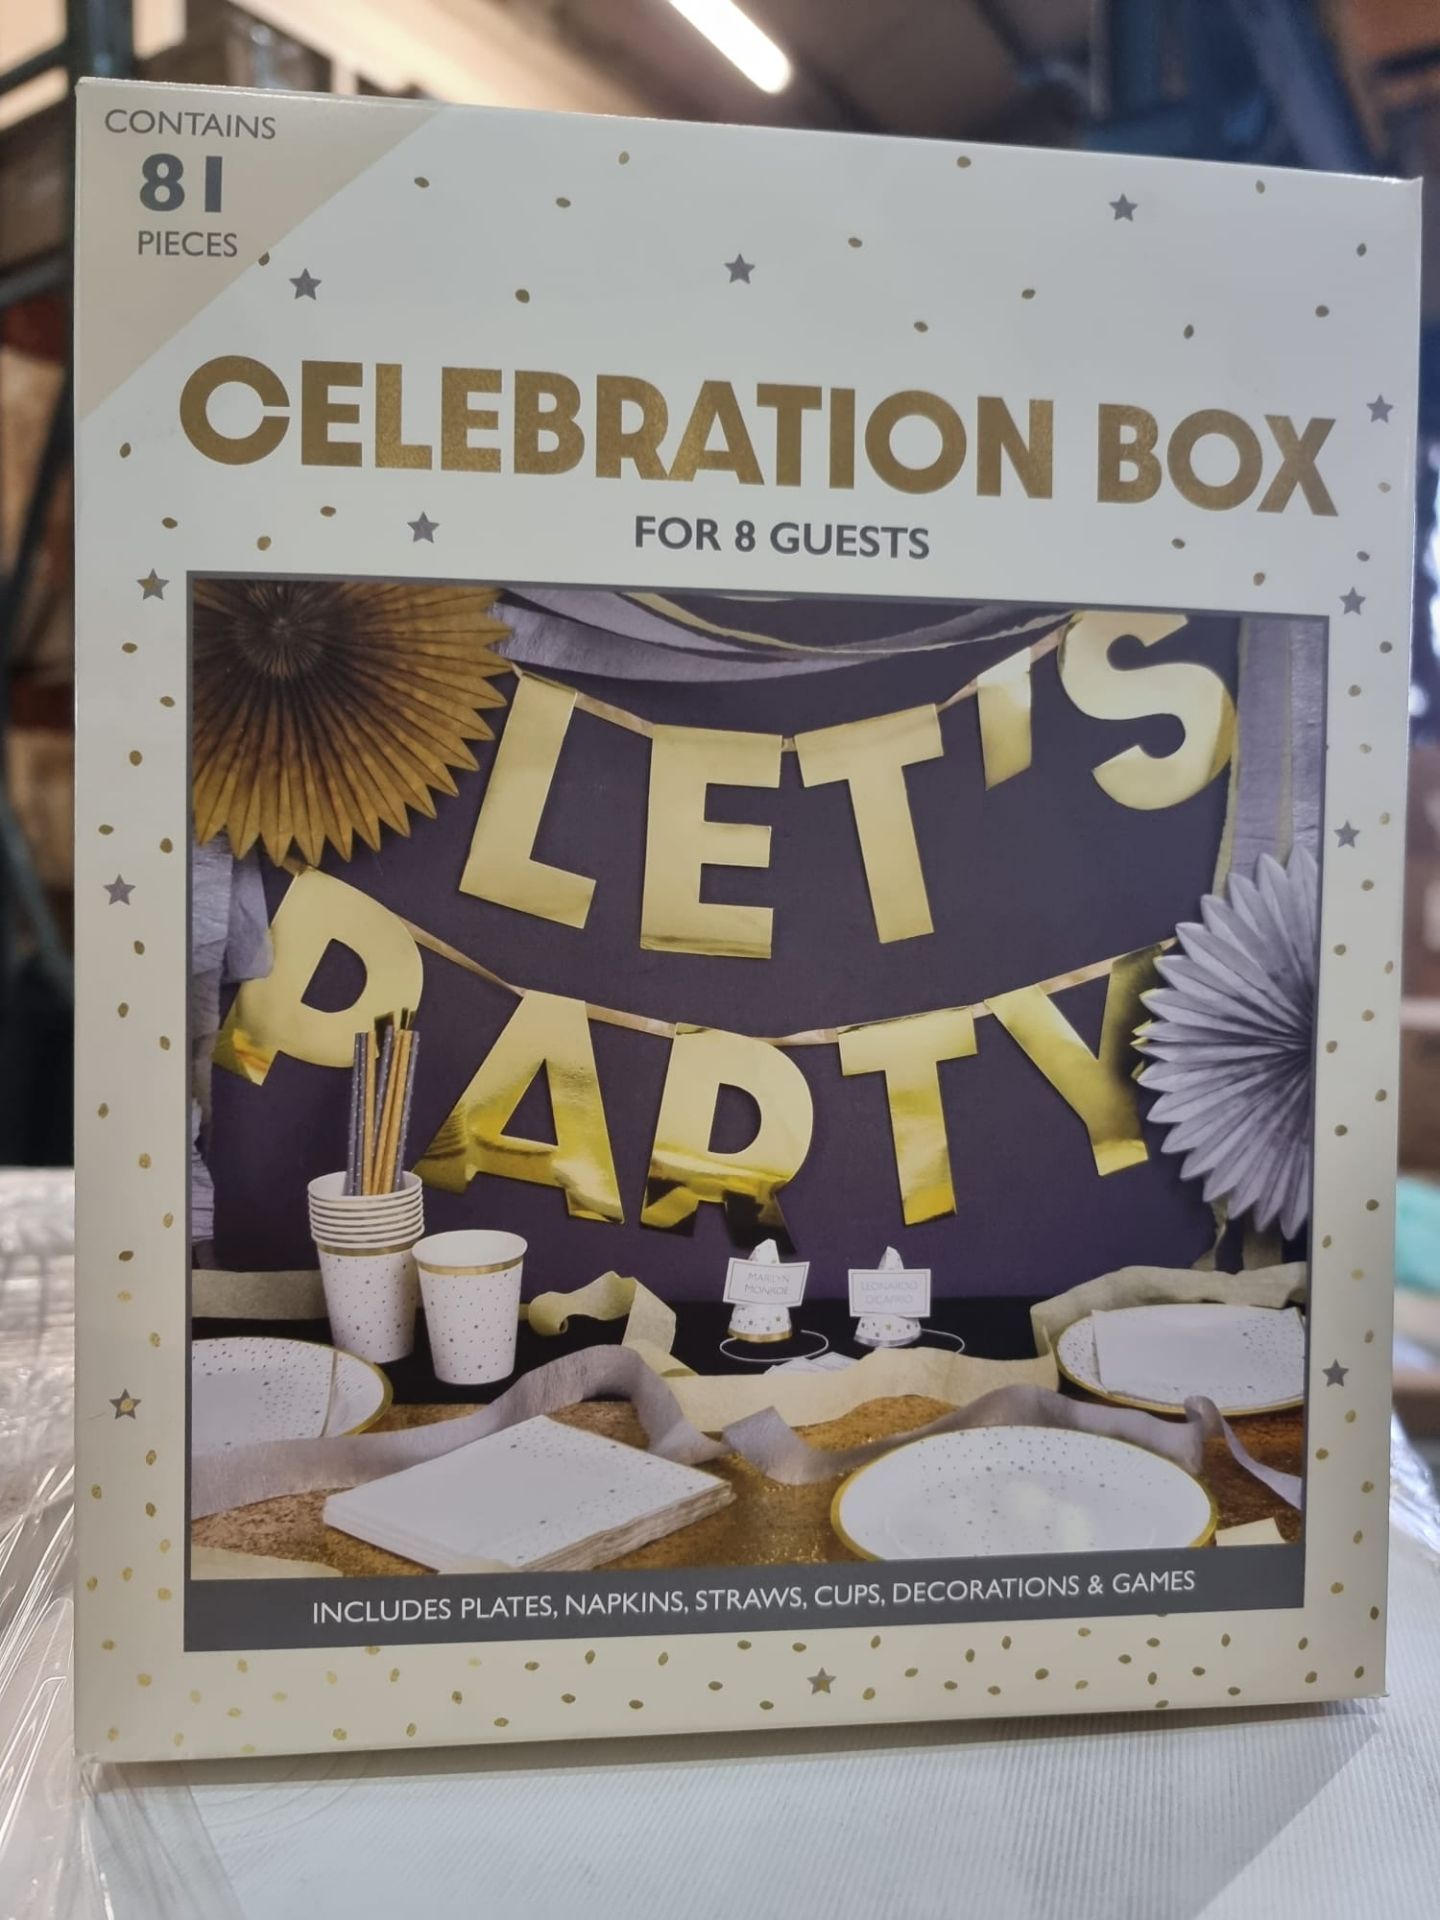 10 x NEW 81 PIECE CELEBRATION BOXES FOR 8 GUESTS. INCLUDES: PLATES, NAPKINS, STRAWS, CUPS,